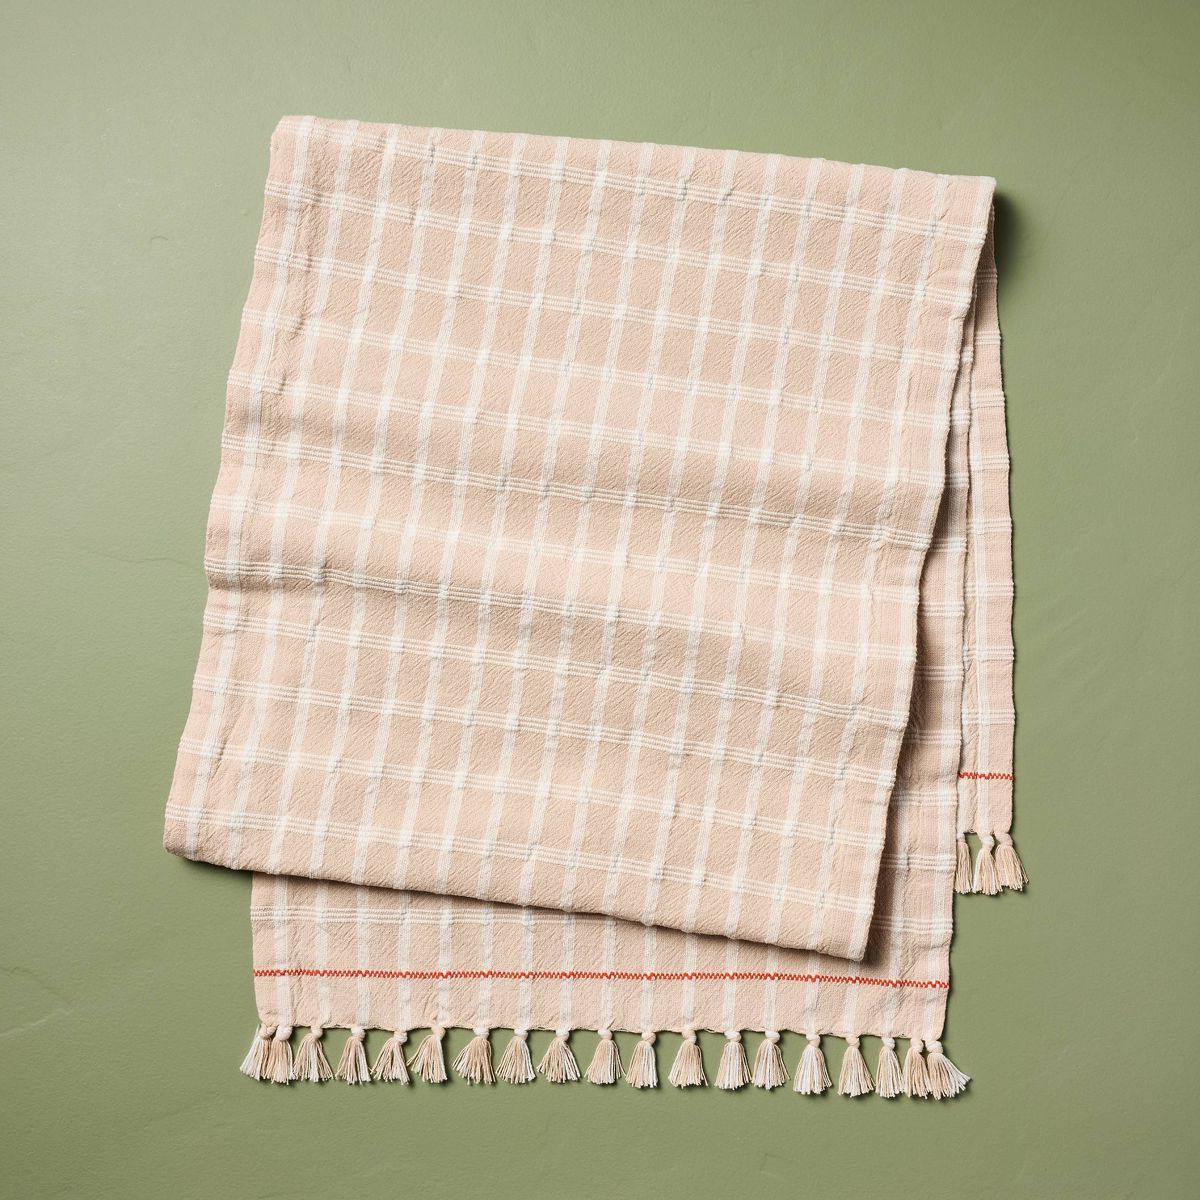 20"x90" Tri-Stripe Plaid Stitched Table Runner - Hearth & Hand™ with Magnolia | Target